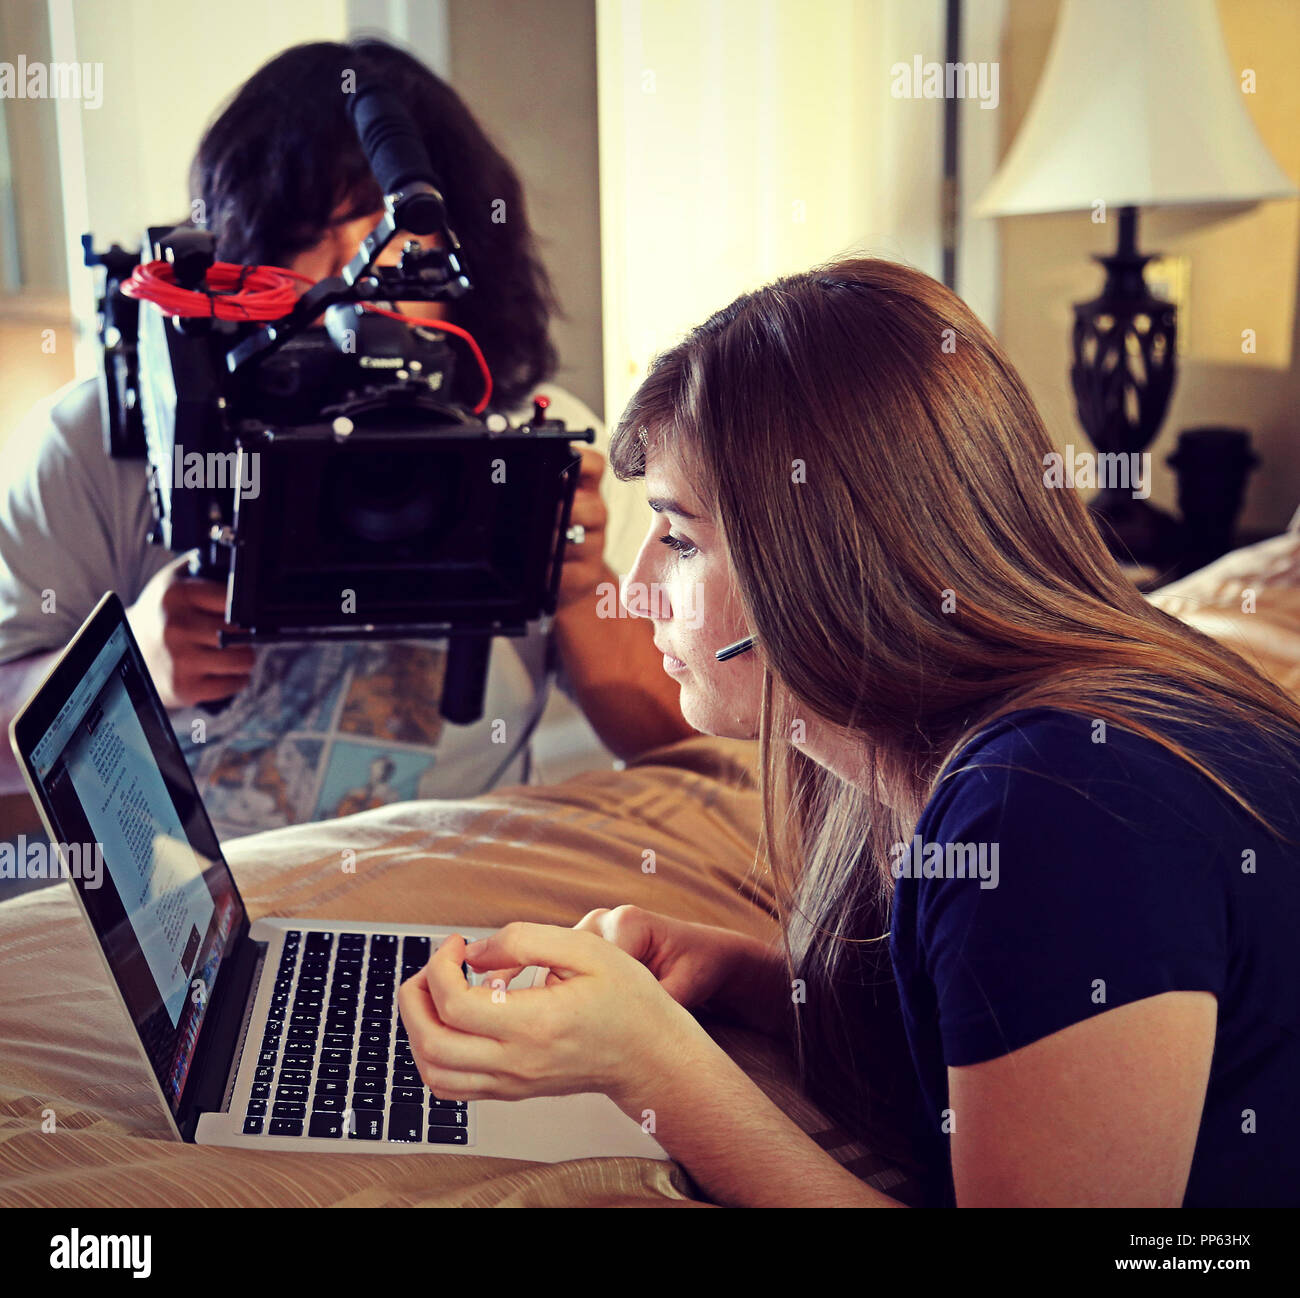 Production still from a short film. Cinematographer captures hand-held footage of a woman working on her laptop computer. Stock Photo